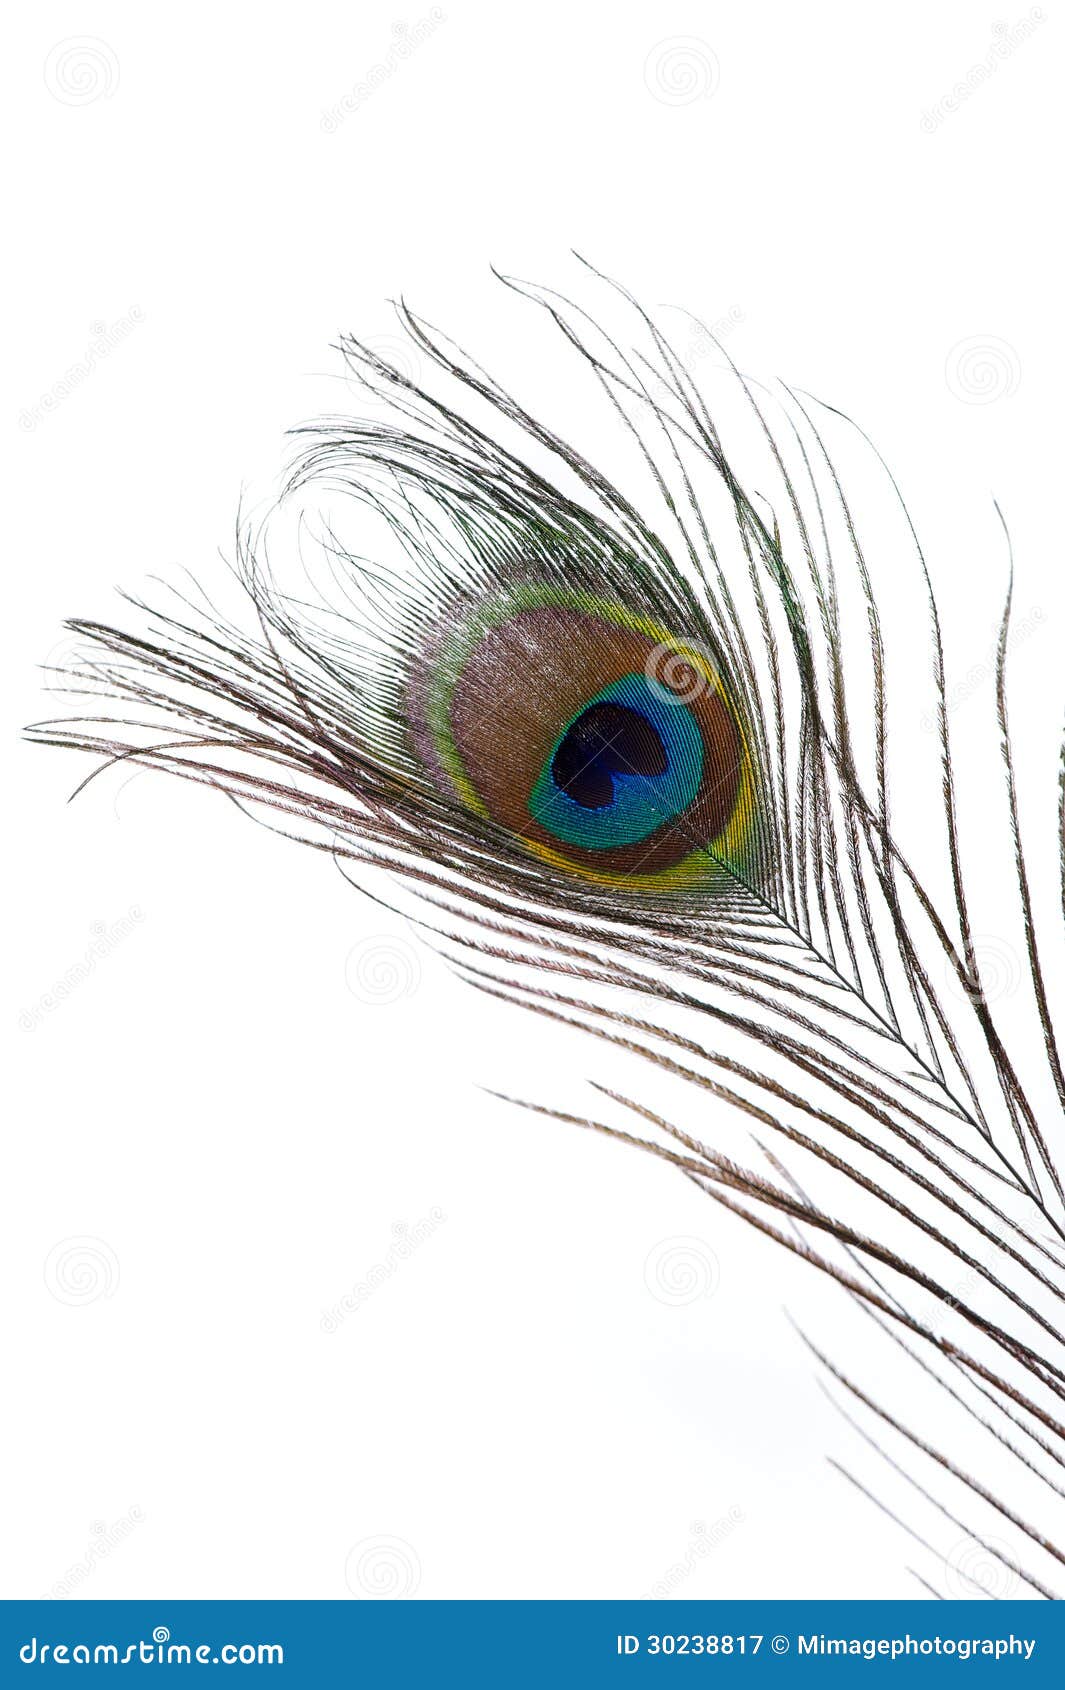 Peacock Feather Isolated stock image. Image of bright - 30238817